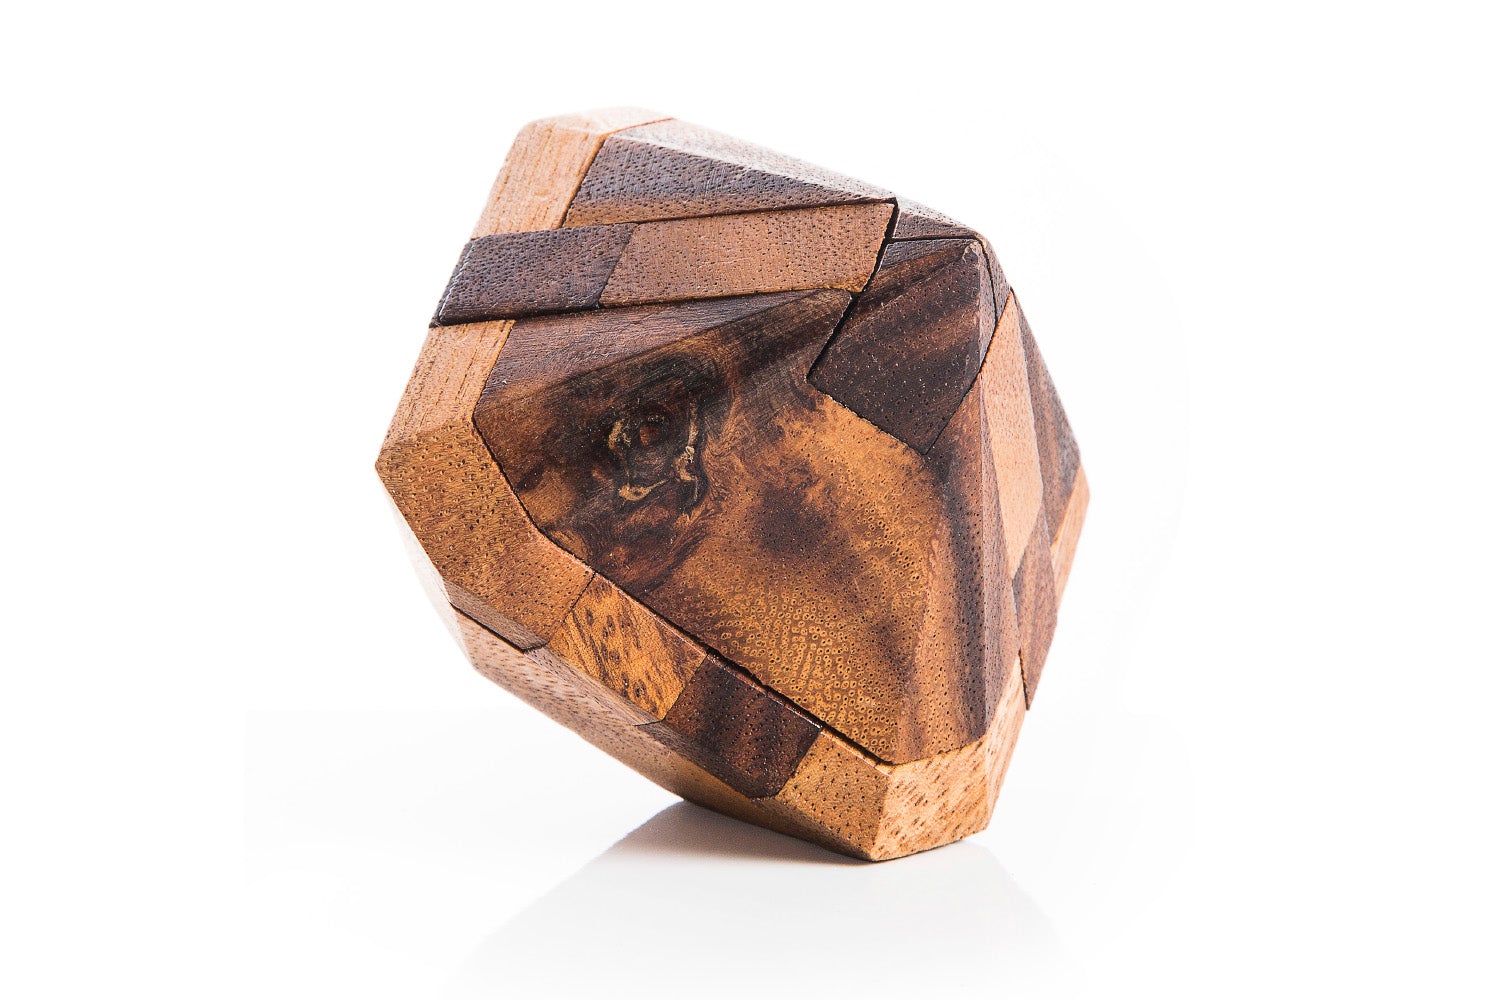 uPuzzled Fillmore's Large Wooden 3D Diamond Puzzle Adult